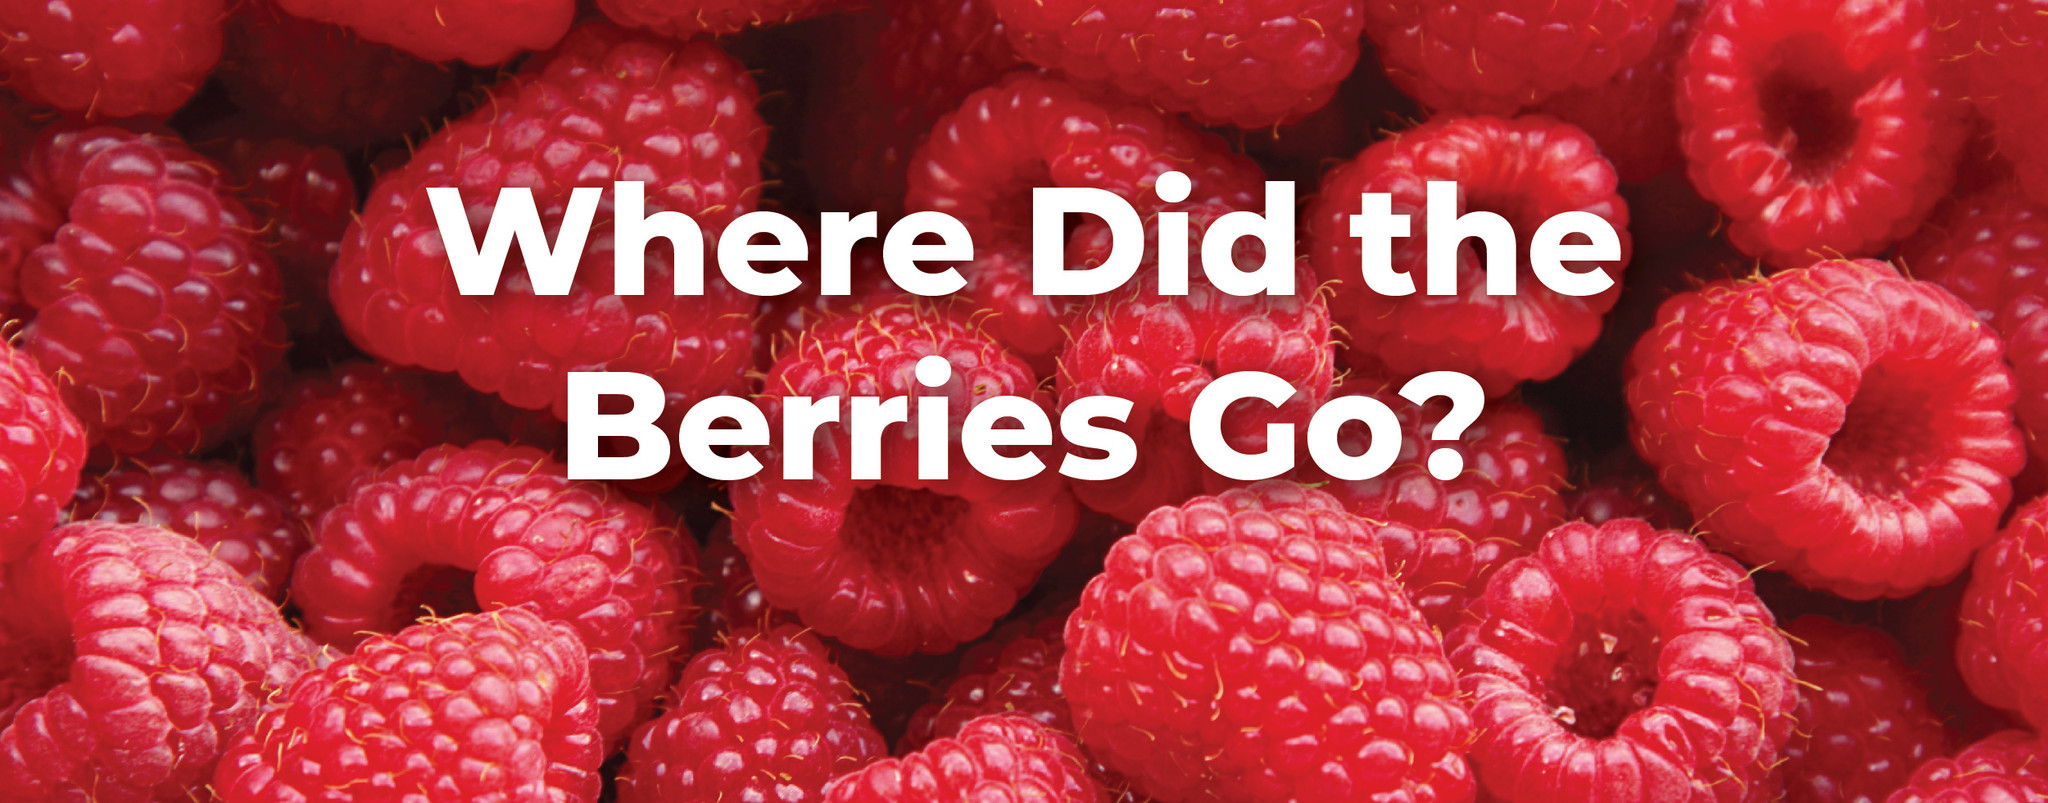 Where Did the Berries Go?